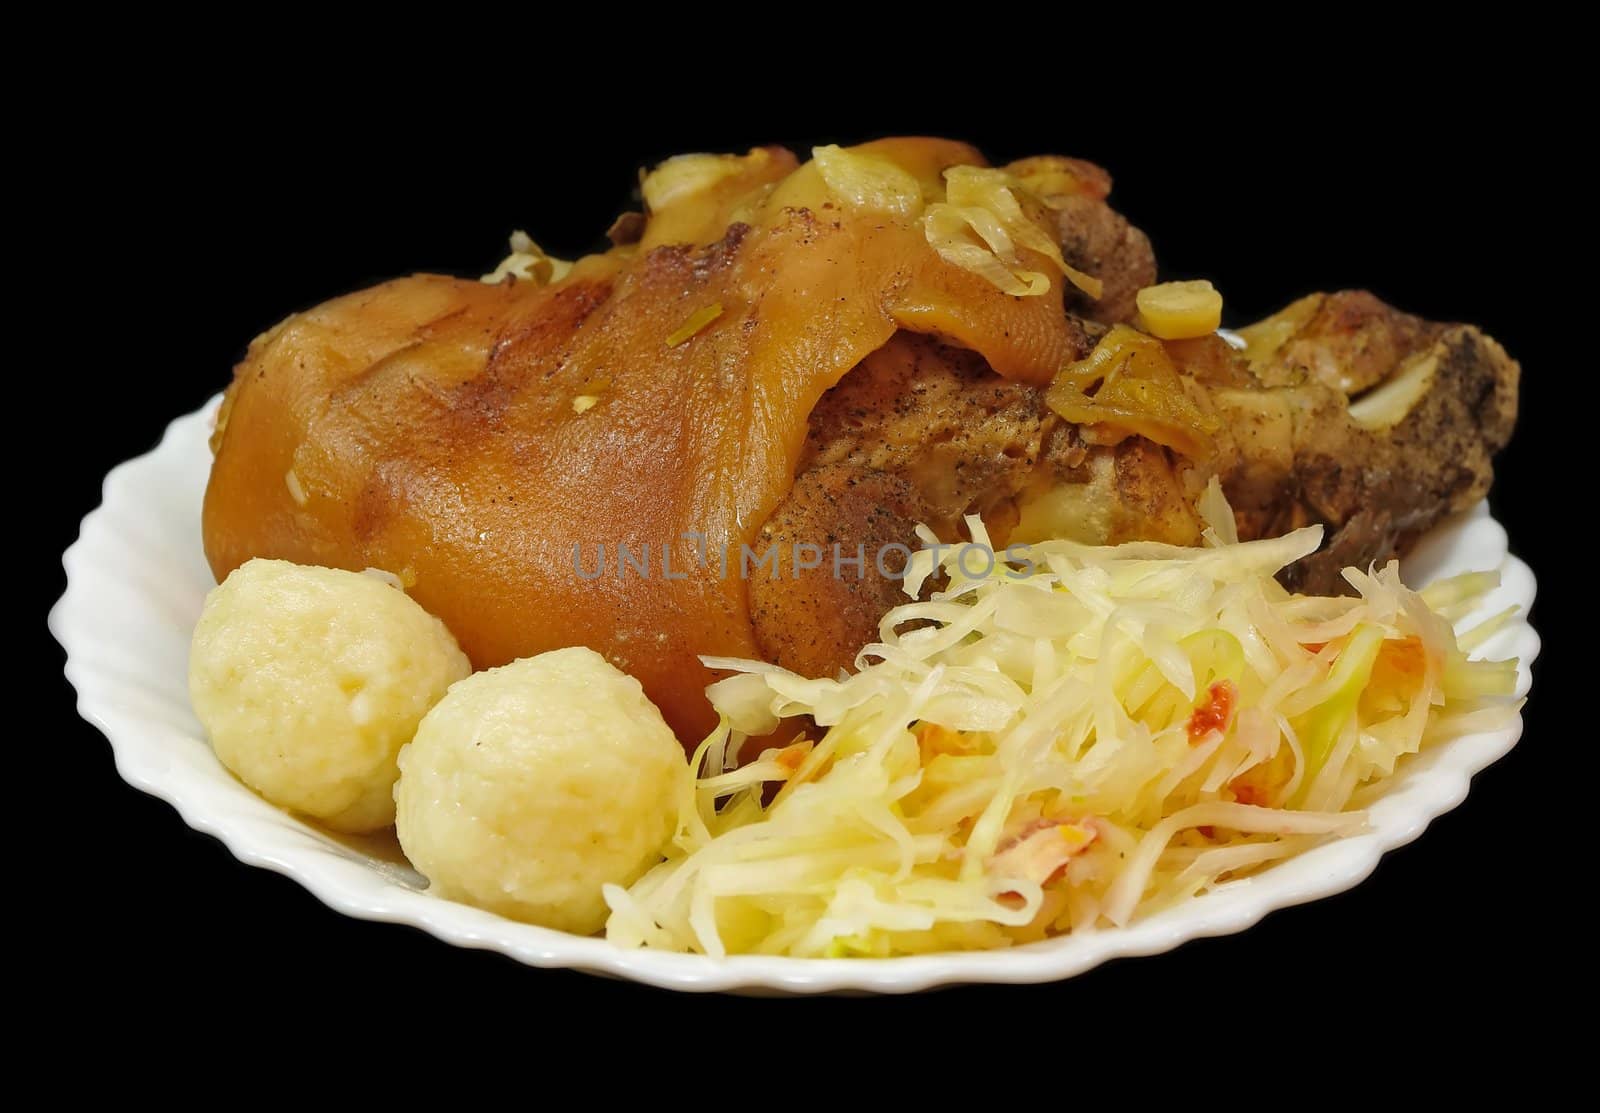 Griled pork knee with cabbage and pastry